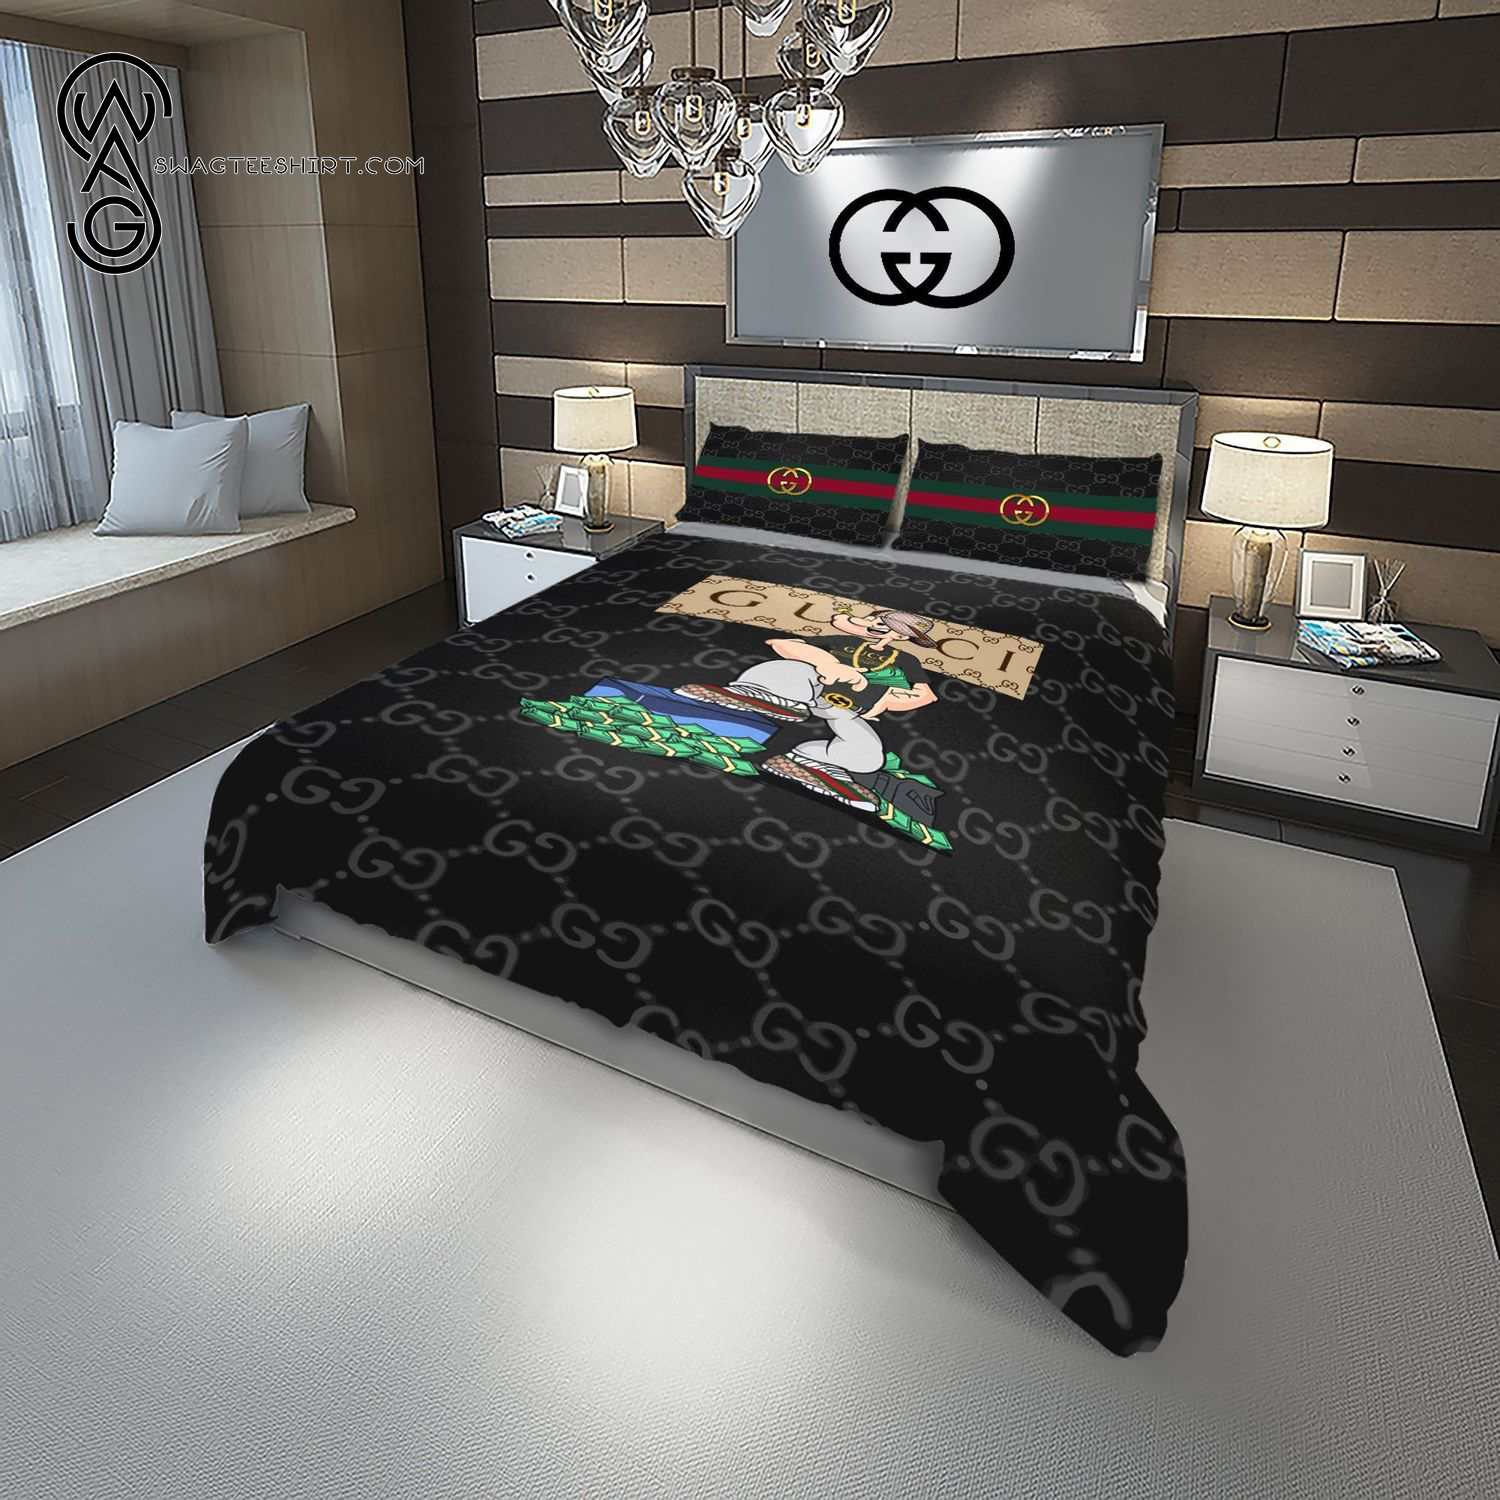 Arctic pop komedie High quality] Gucci And Popeye With Money All Over Print Duvet Cover  Bedroom Sets